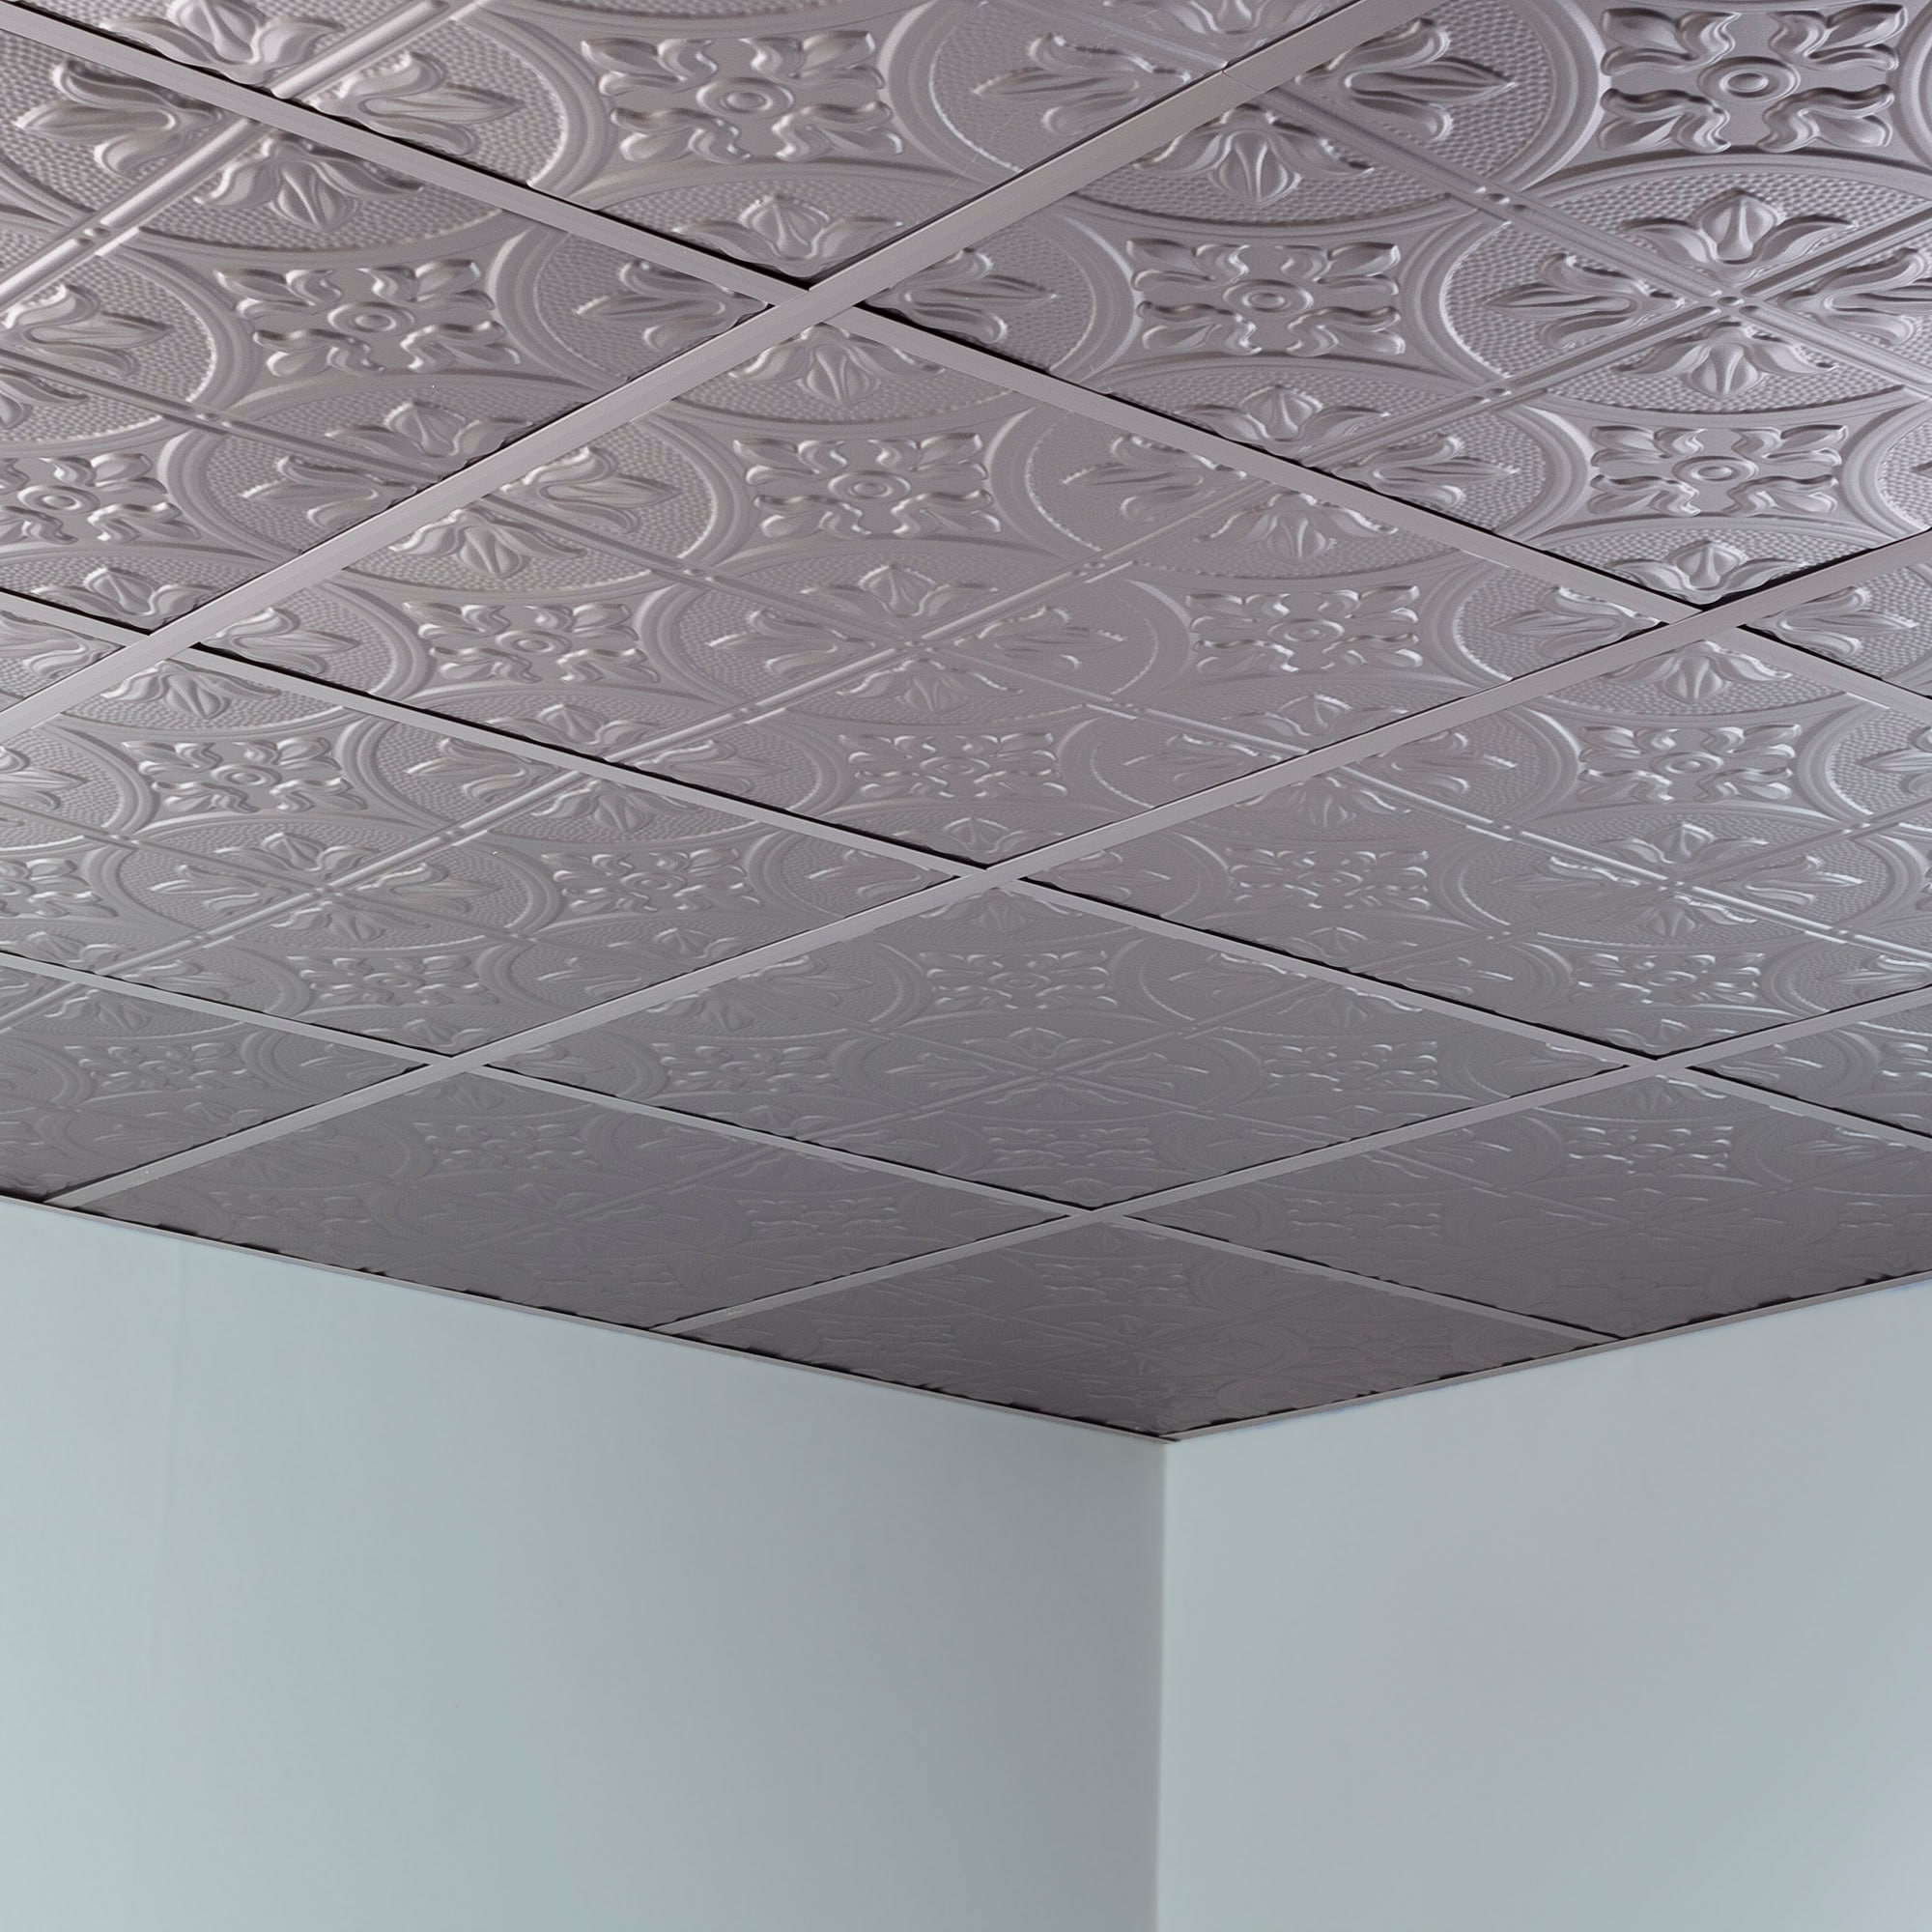 Fasade 2-ft x 2-ft Traditional 2 Argent Silver PVC Drop Ceiling Tile (5 ...